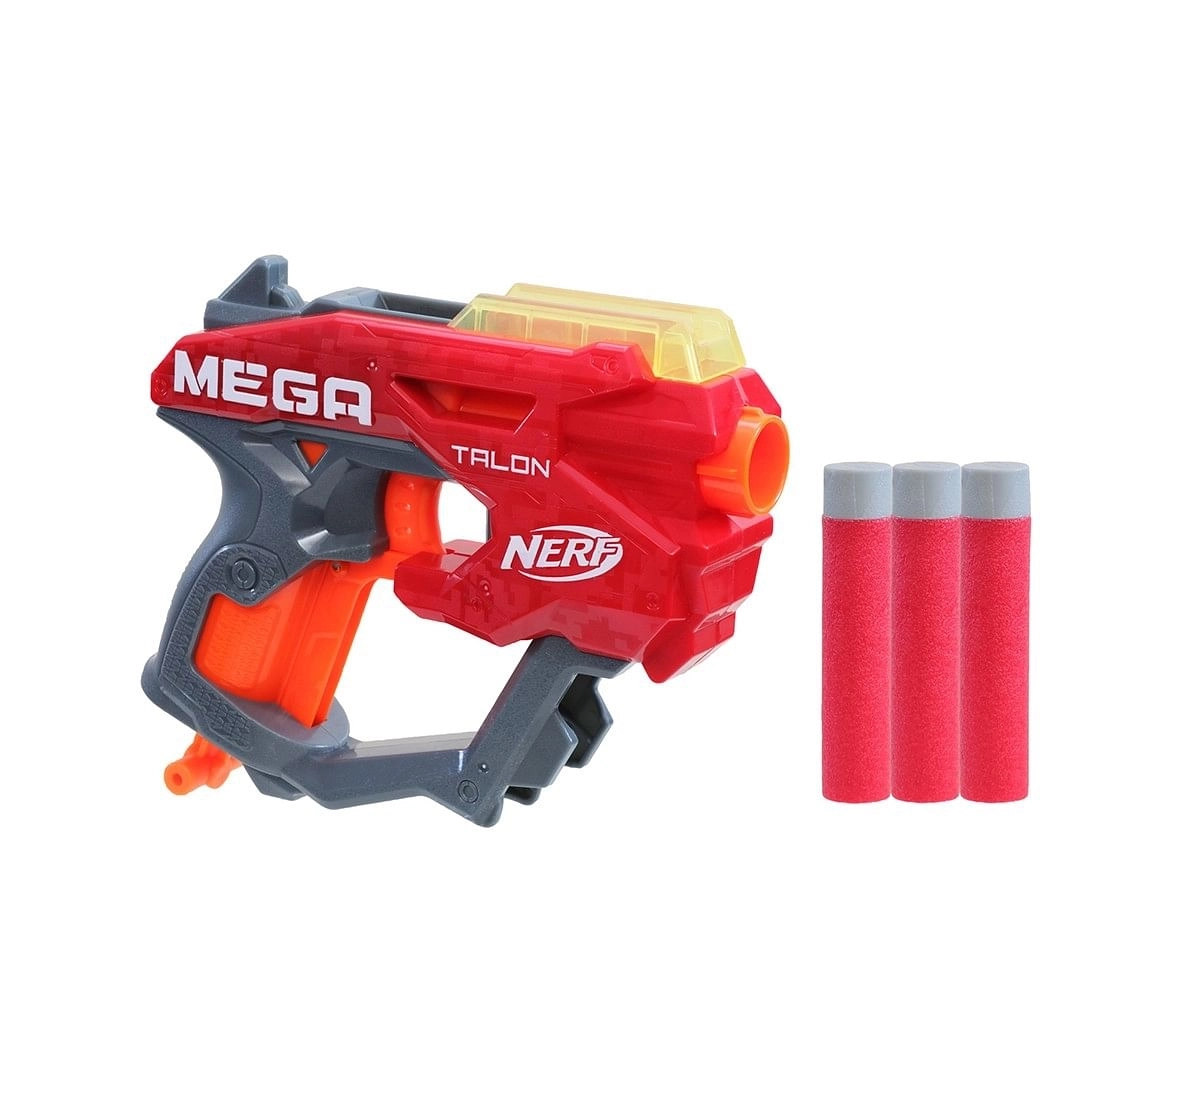 Nerf Mega Talon Blaster -- Includes 3 Official AccuStrike Nerf Mega Darts -- For Kids, Teens, Adults Blasters for age 8Y+ 